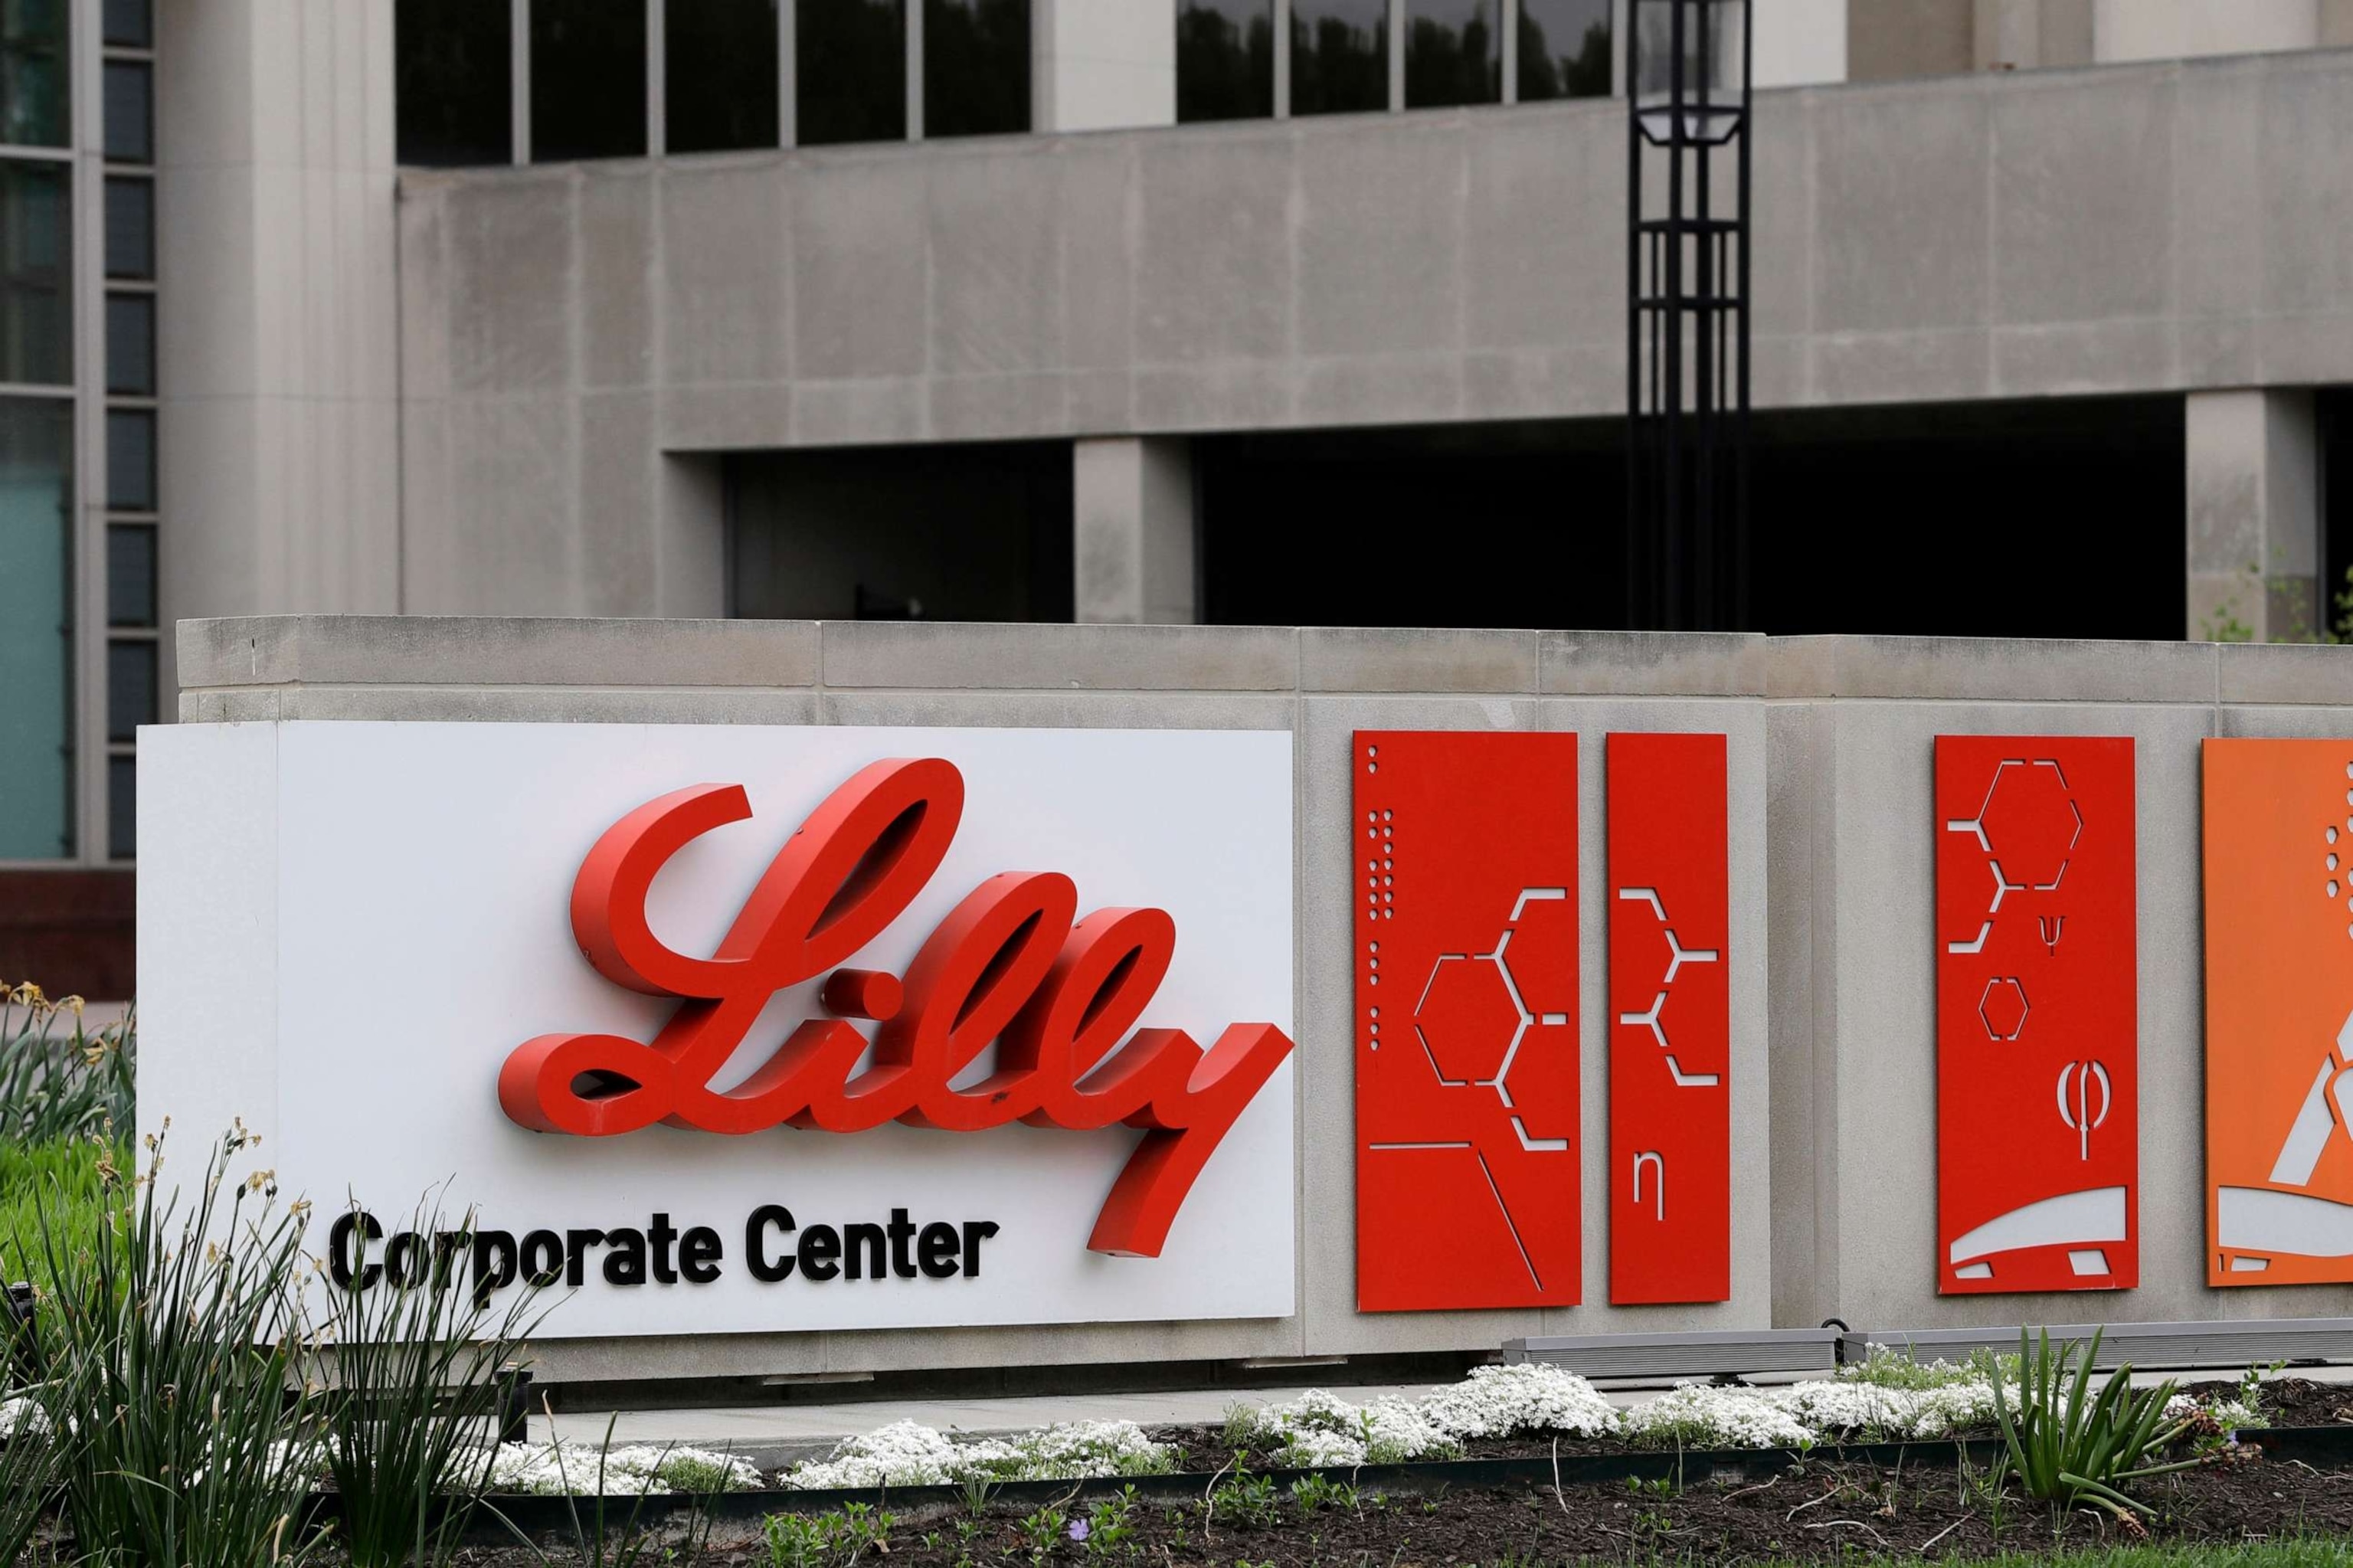 PHOTO: The Eli Lilly & Co. corporate headquarters are seen in Indianapolis on April 26, 2017.